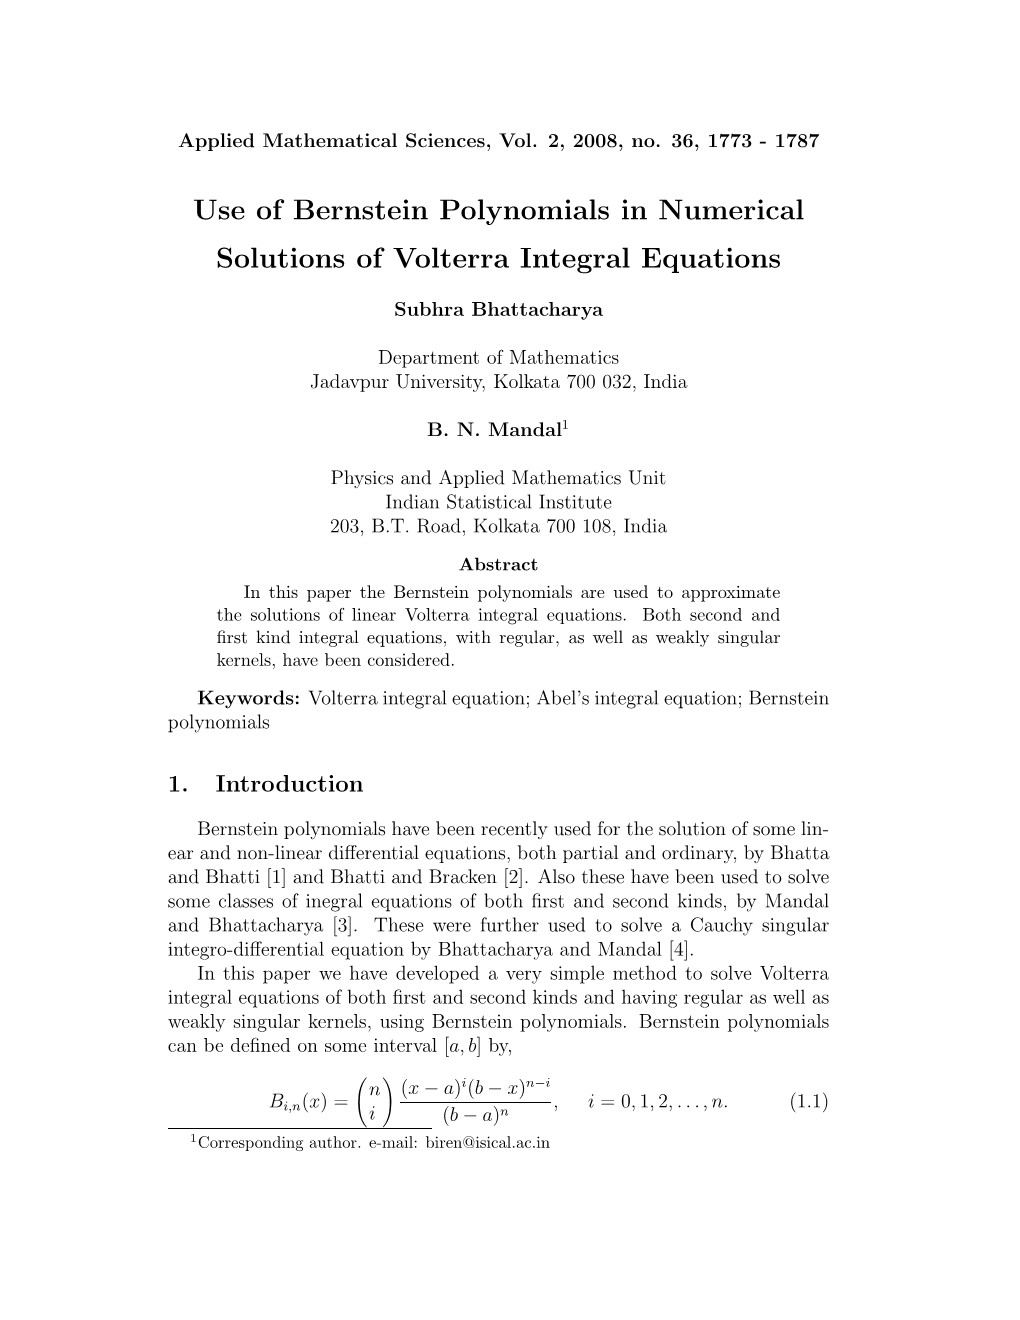 Use of Bernstein Polynomials in Numerical Solutions of Volterra Integral Equations